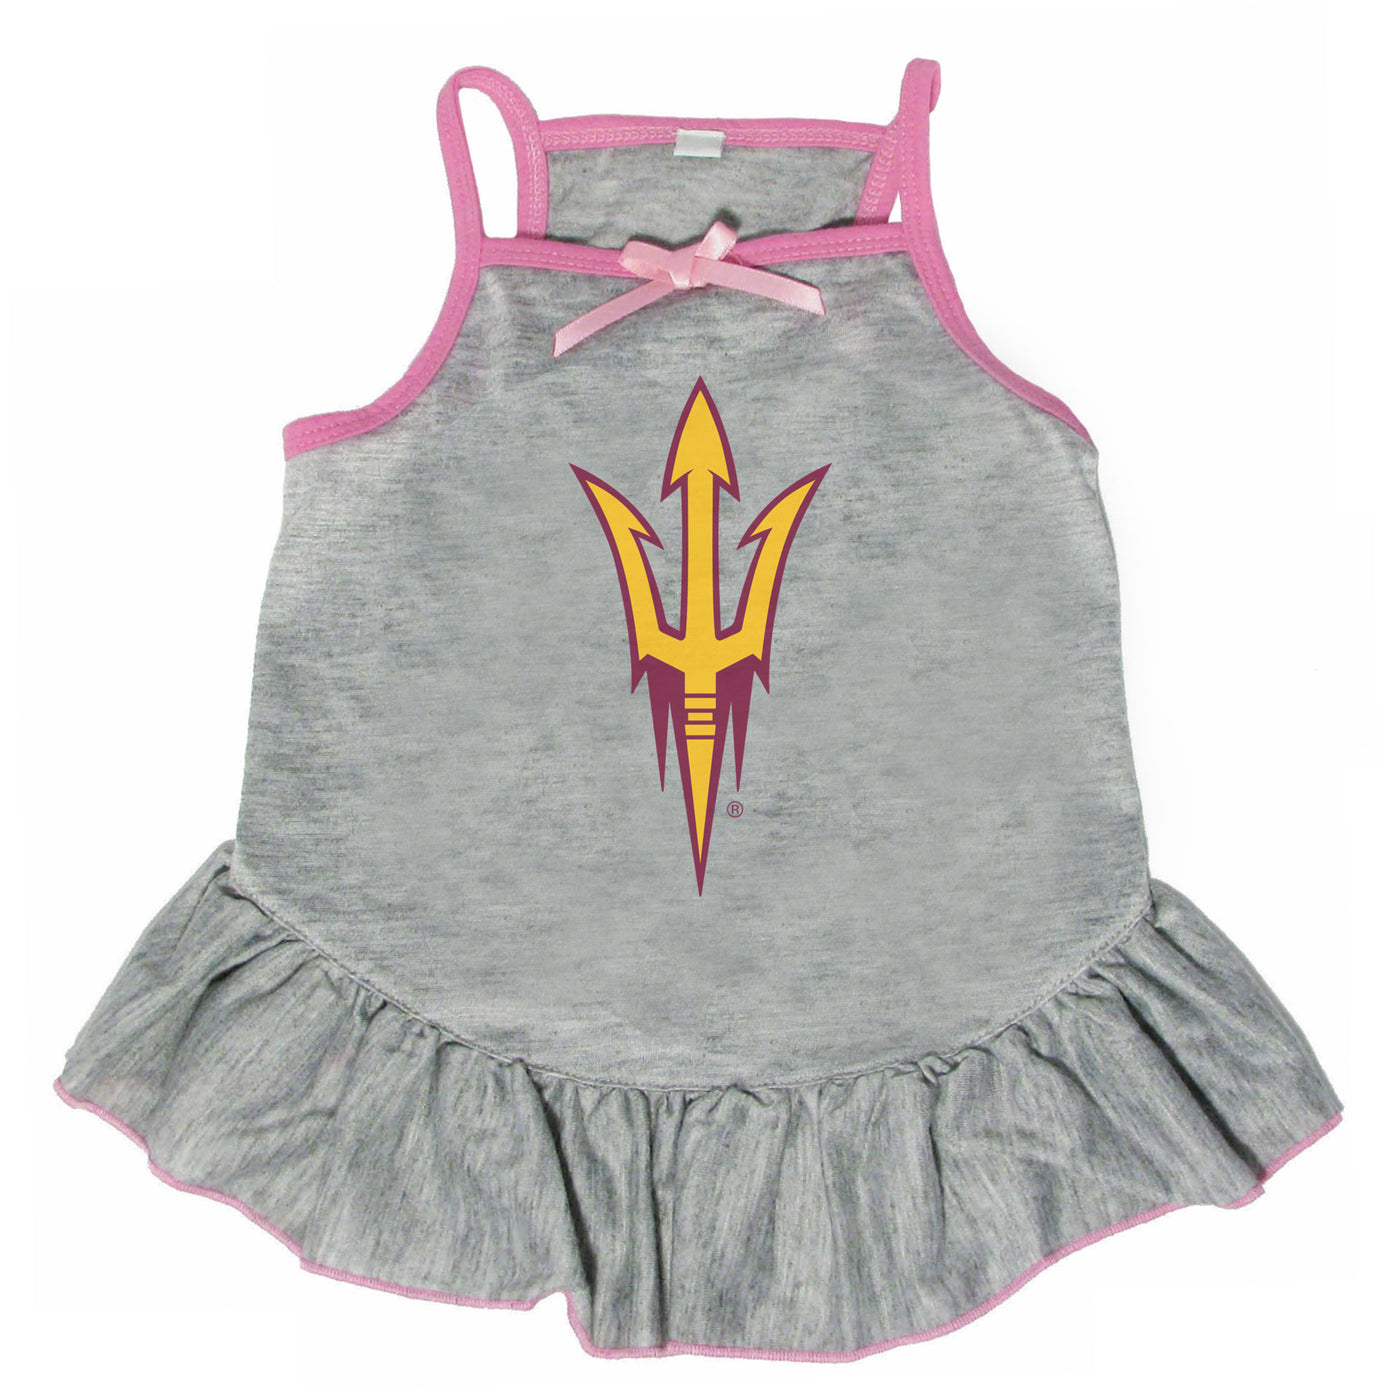 ASU gray pet dress with pink trim and pink straps. A small pink bow on the neckline and a large Pitchfork in gold outlined in maroon on the back.